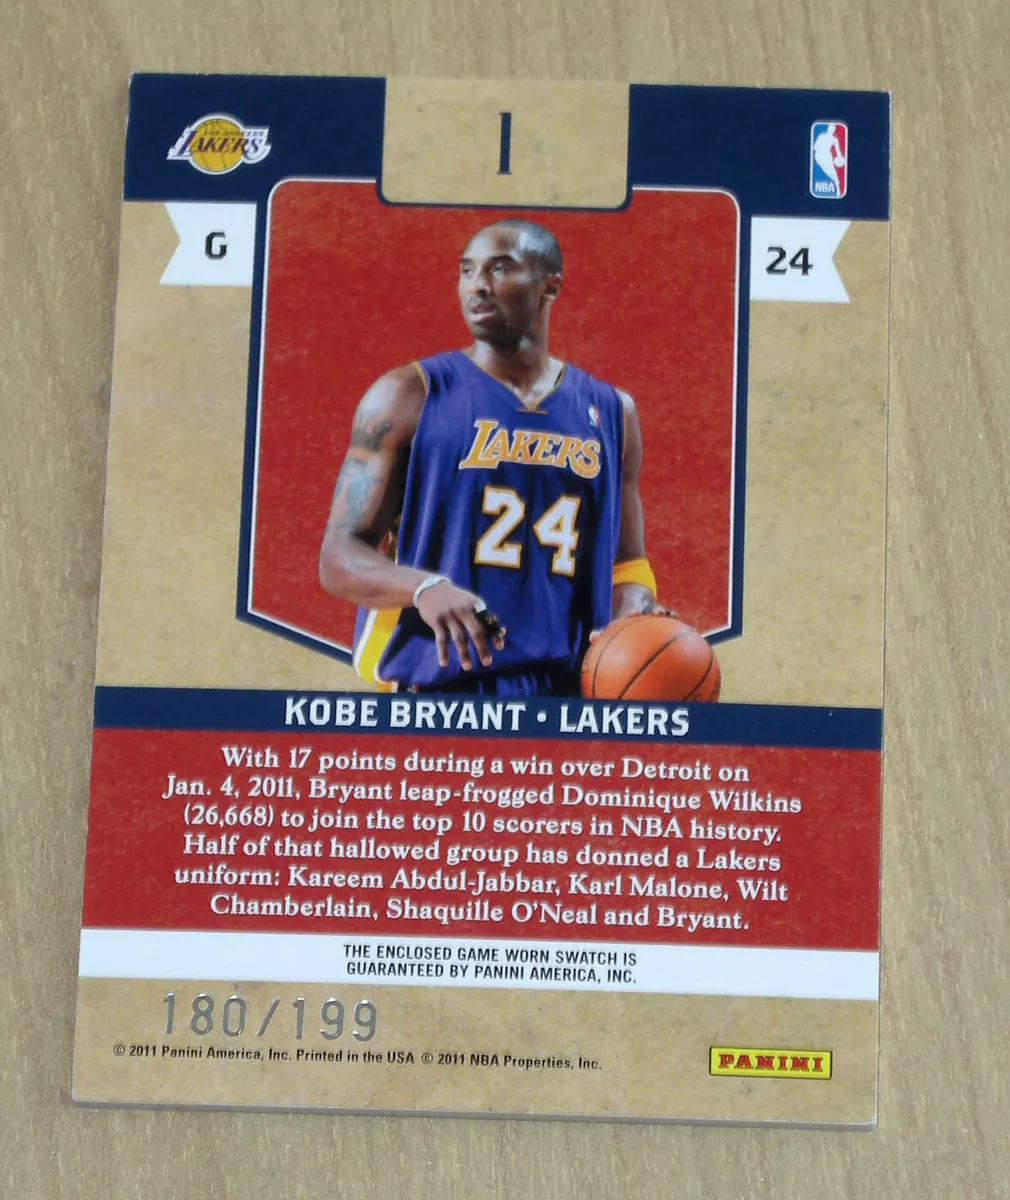 Kobe Bryant Quote: “I wear the number 10 Jersey for the US